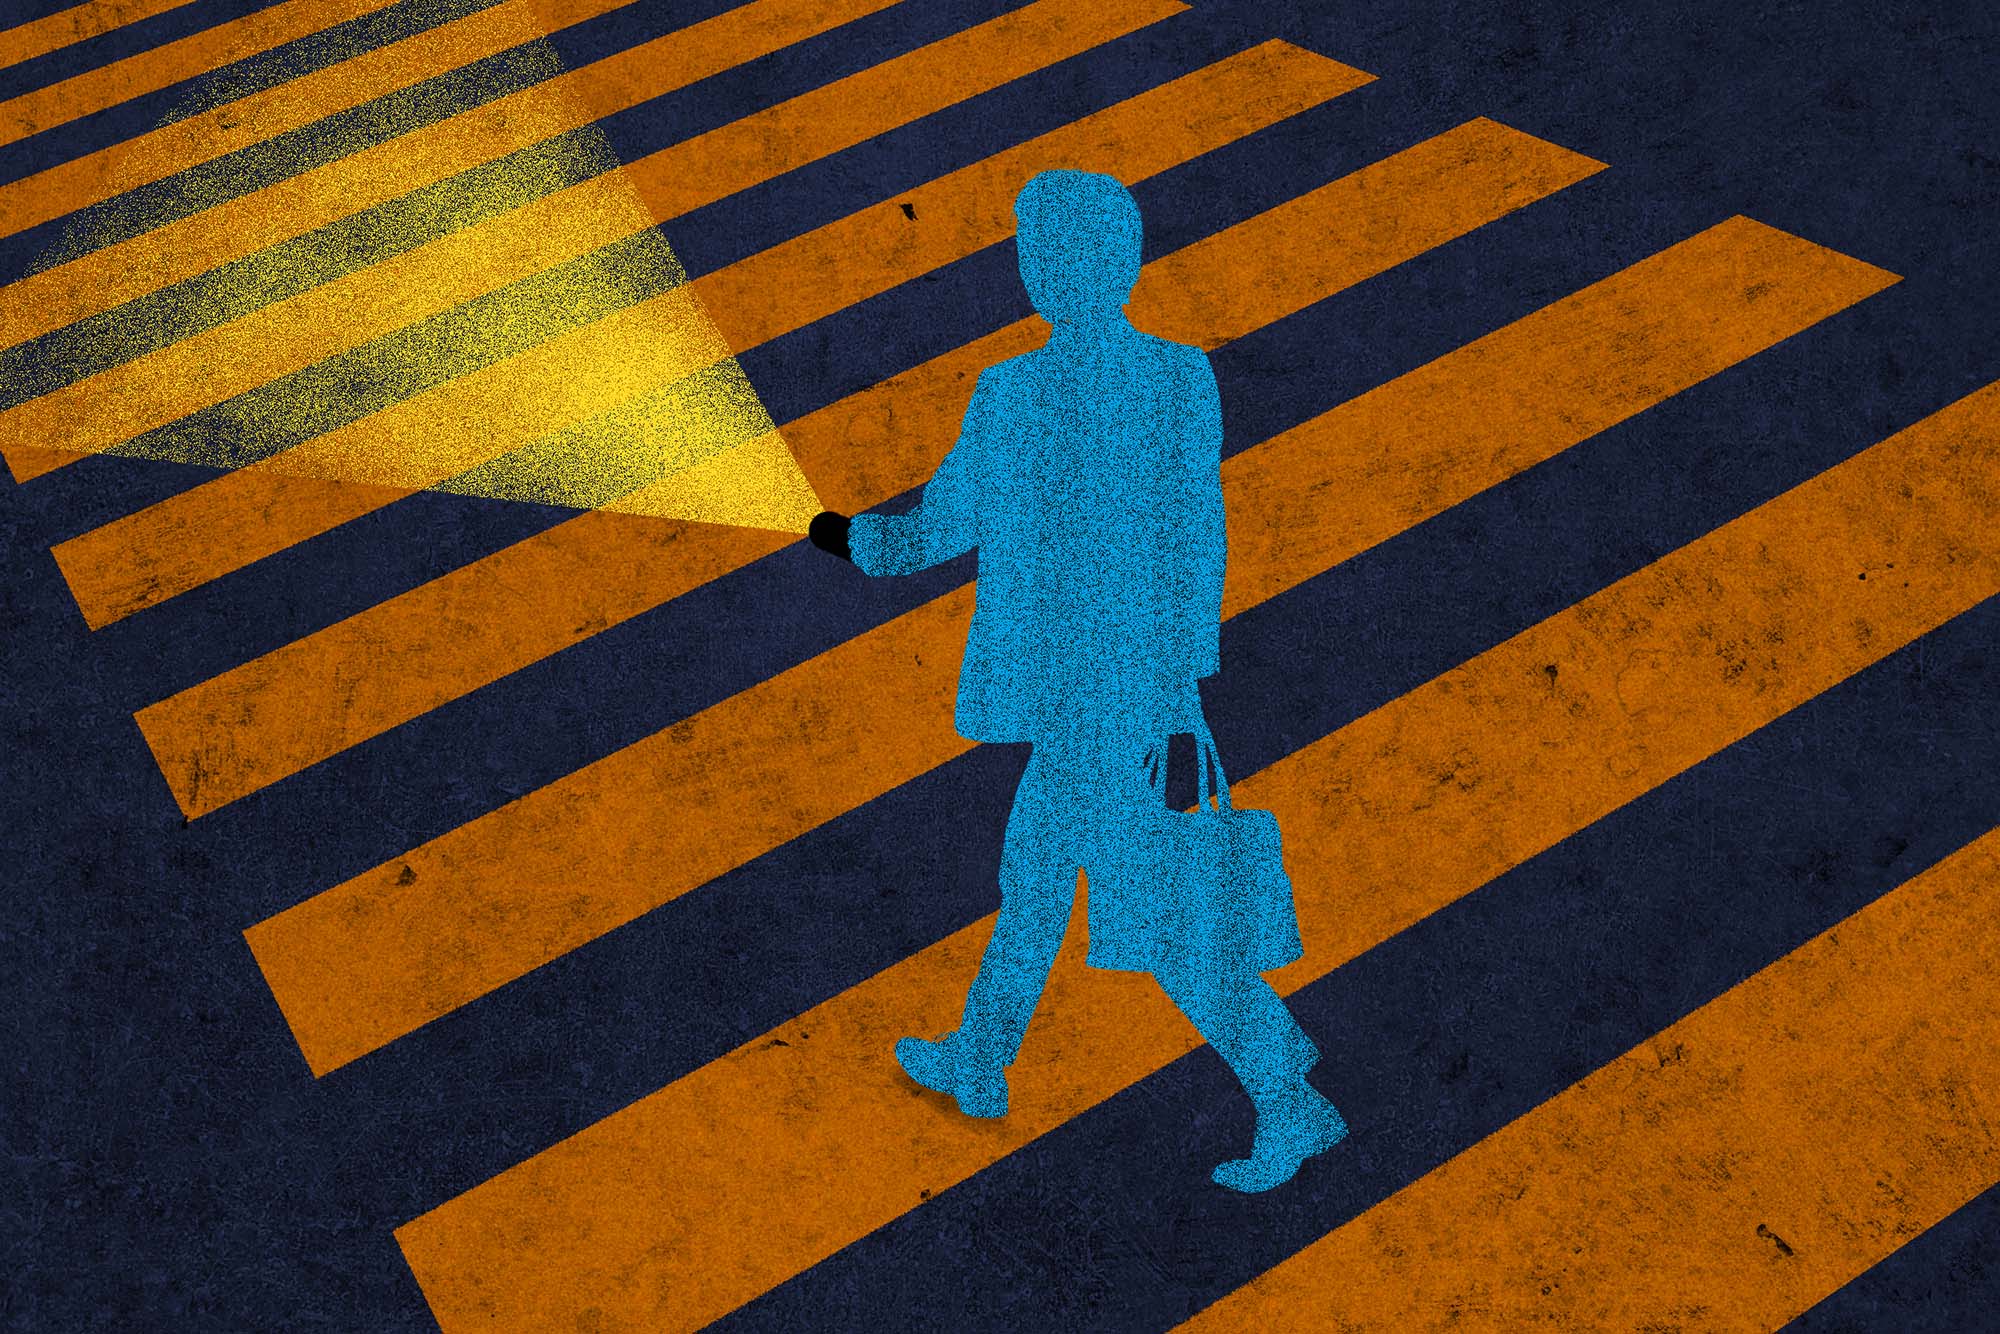 illustration of person in crosswalk with flashlight on carrying a bag.